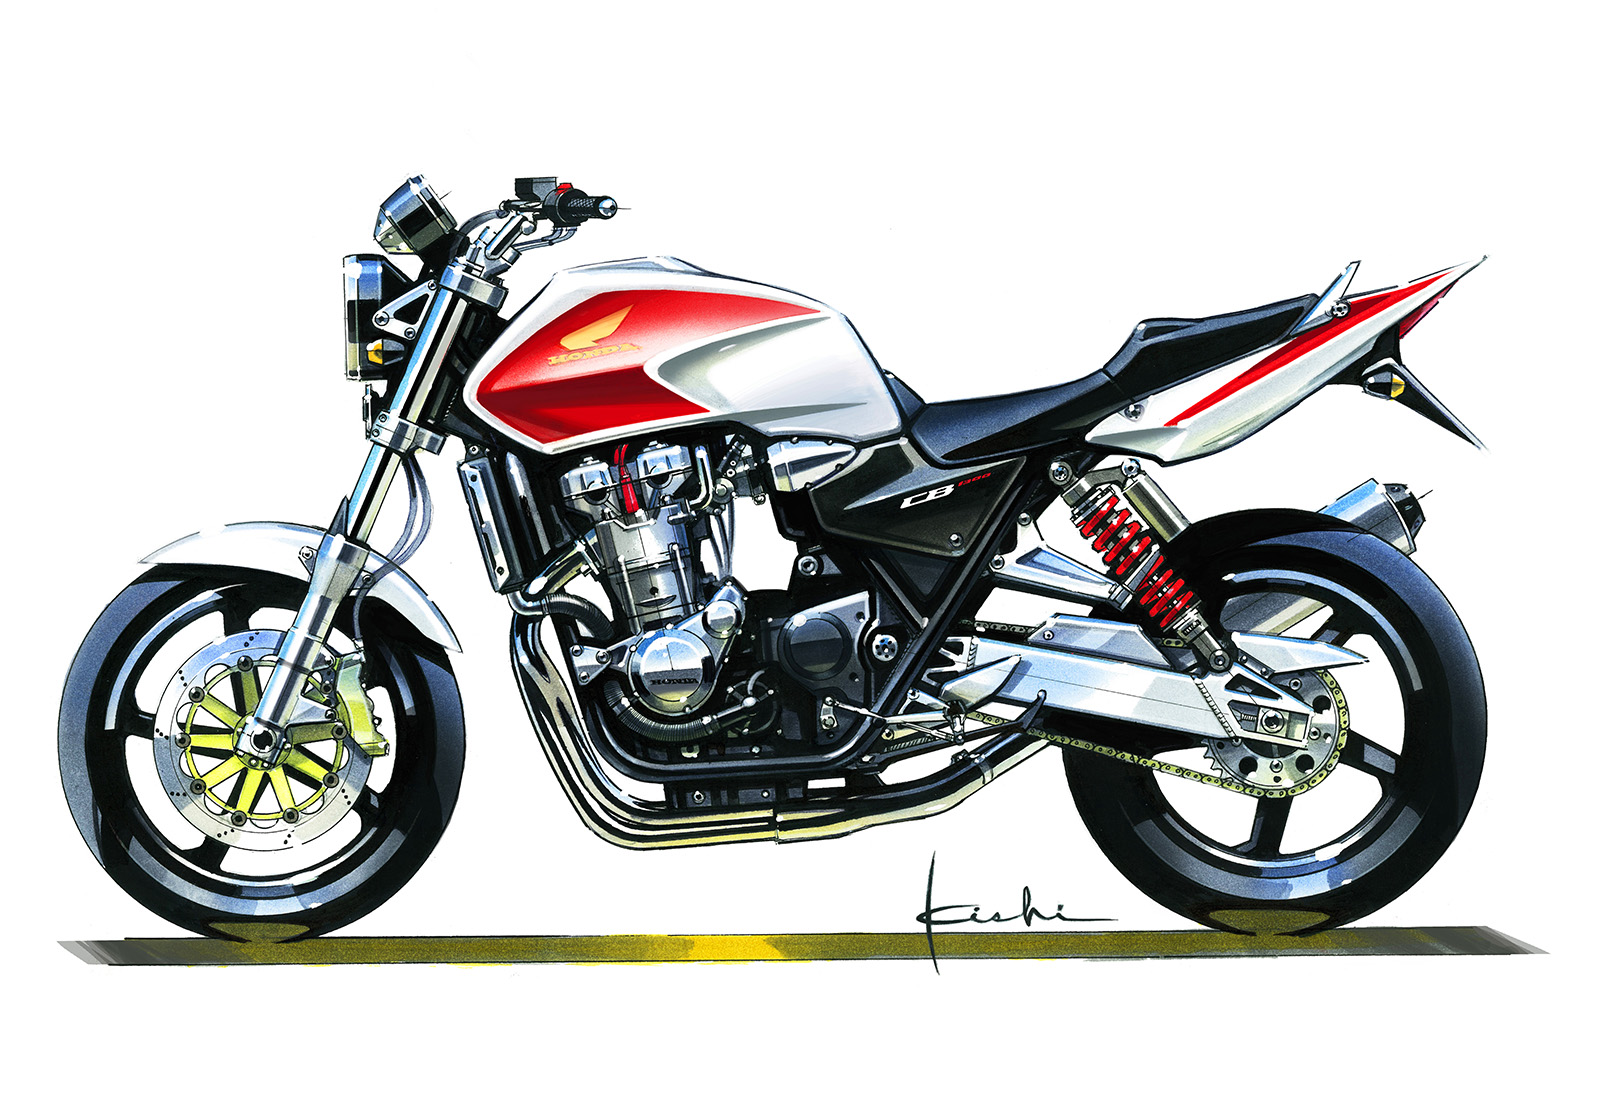 CB1300 SUPER FOUR[2003]final drawing